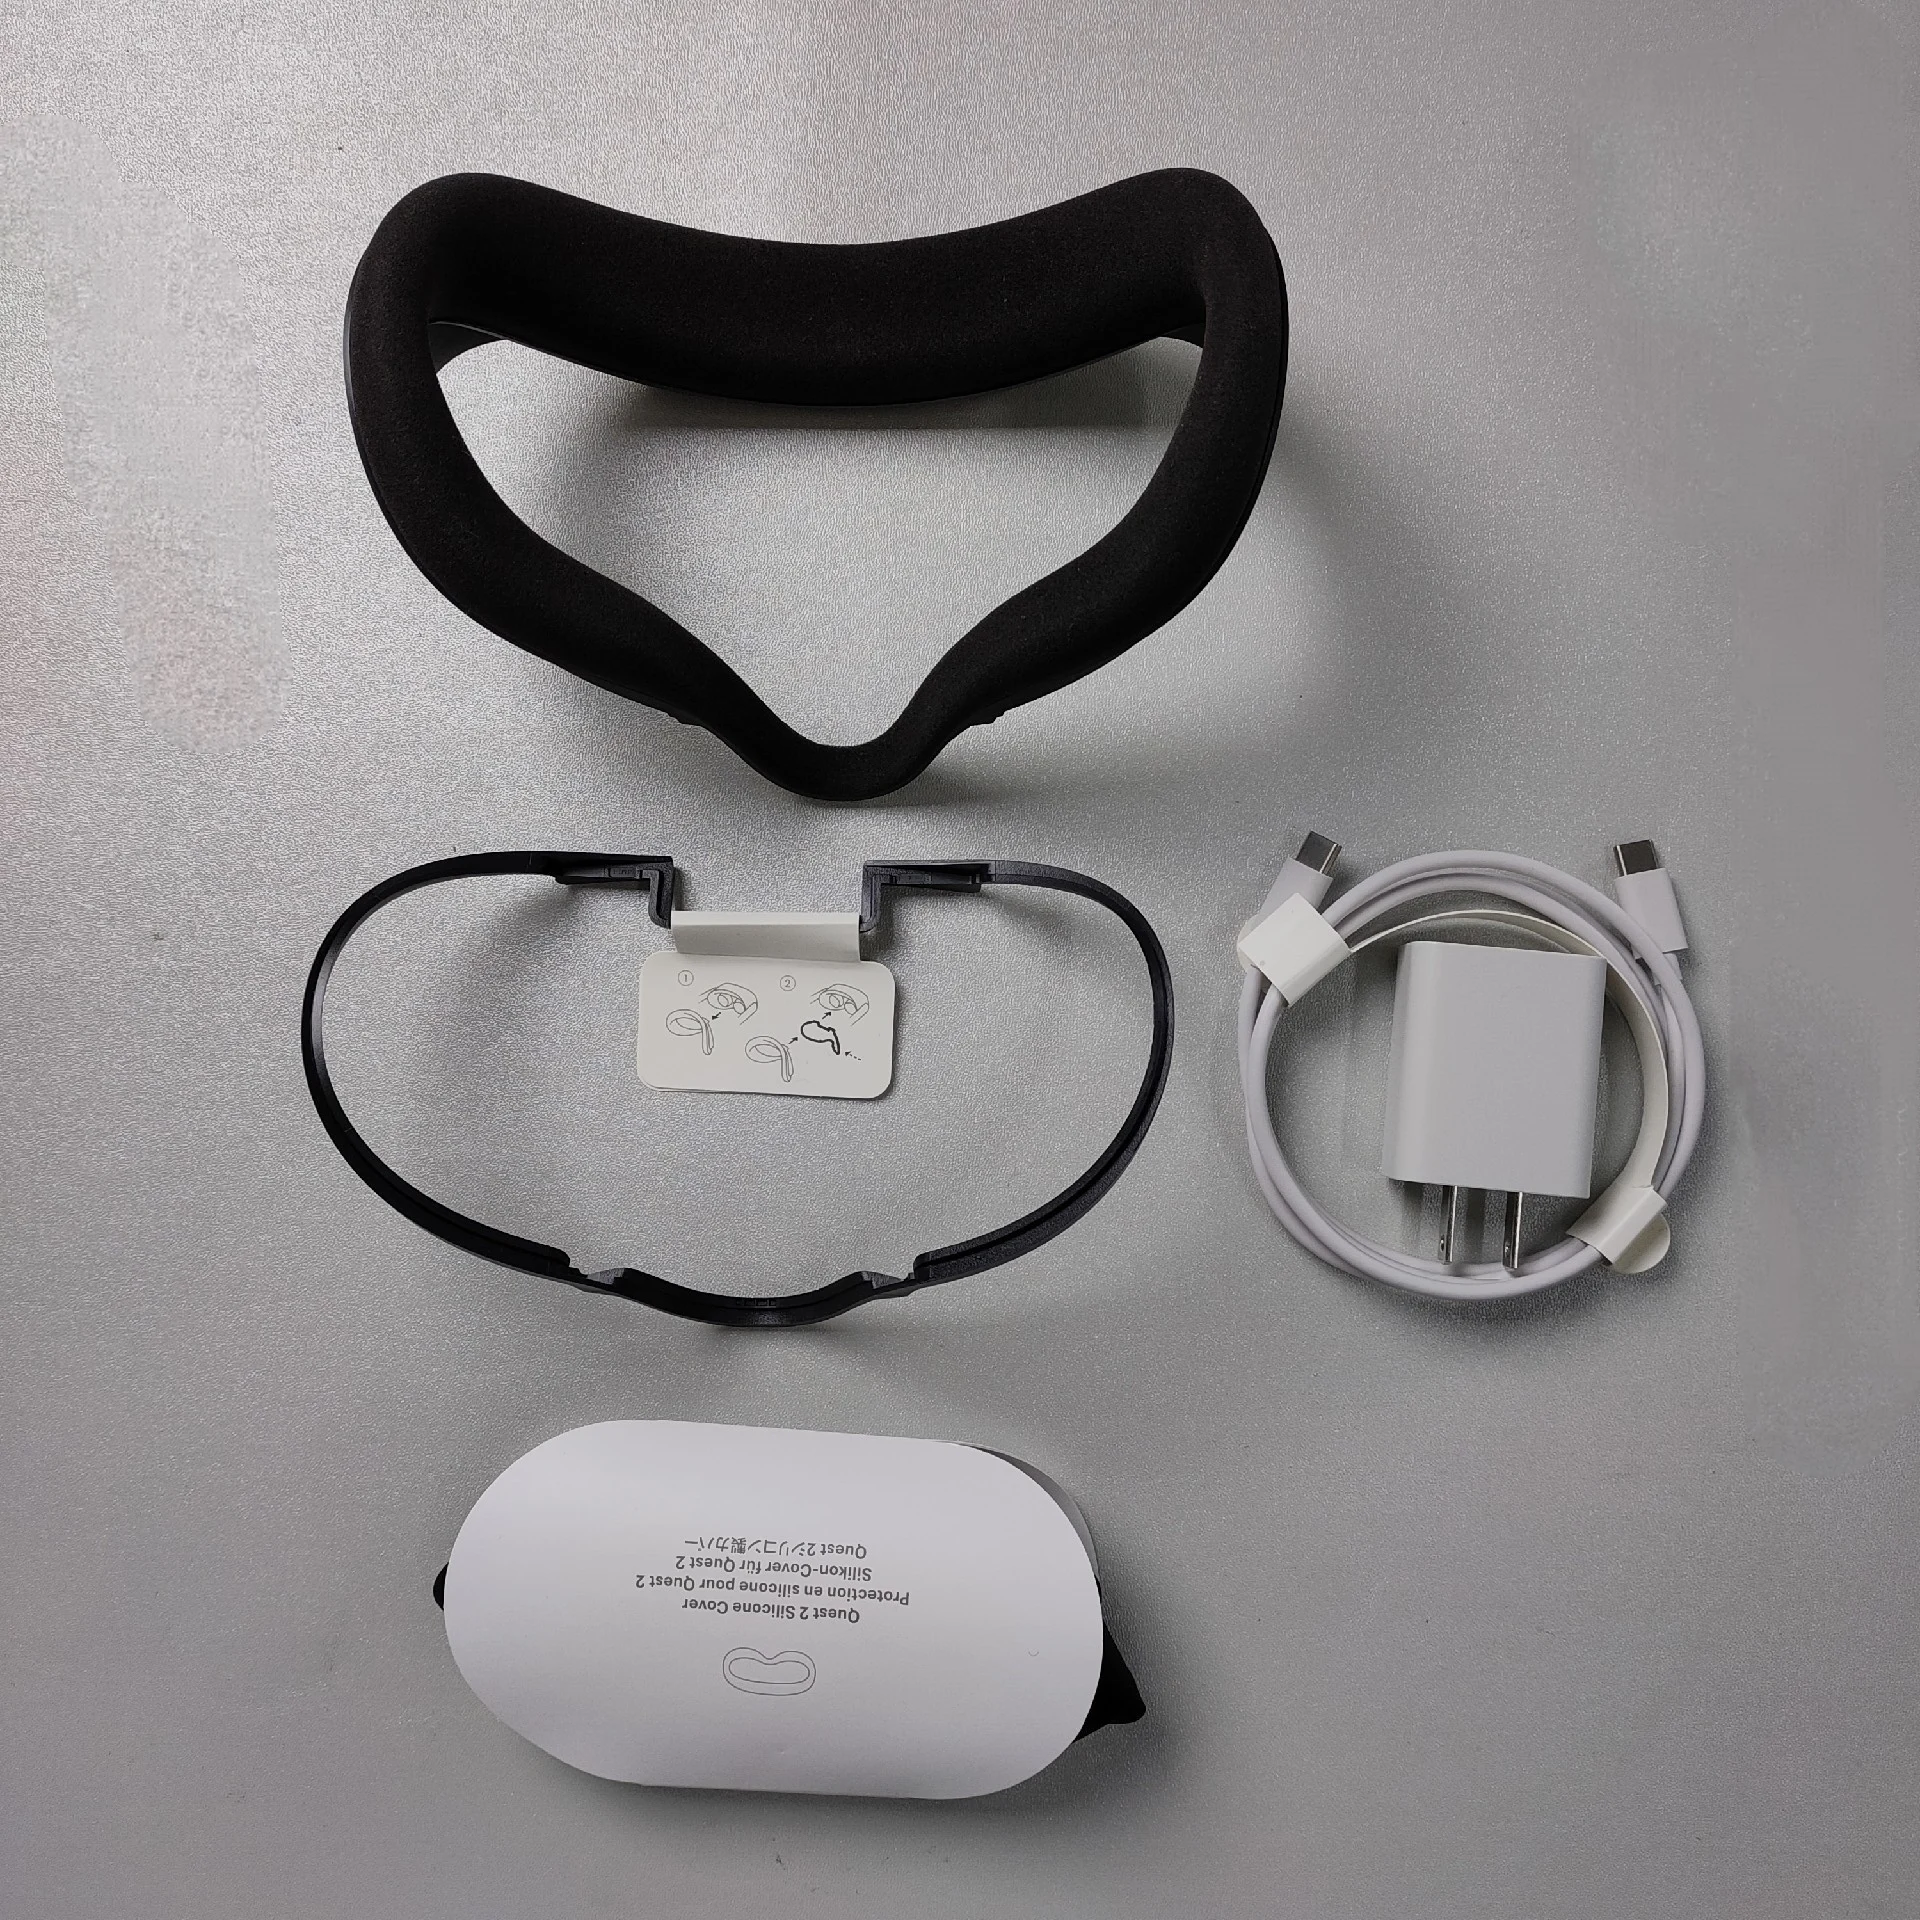 

Original VR Accessories For Oculus Quest 2 VR Headset Head Strap/ Controllers/ Charger/ Silicon Eye Cover/ Face Pad Cushion